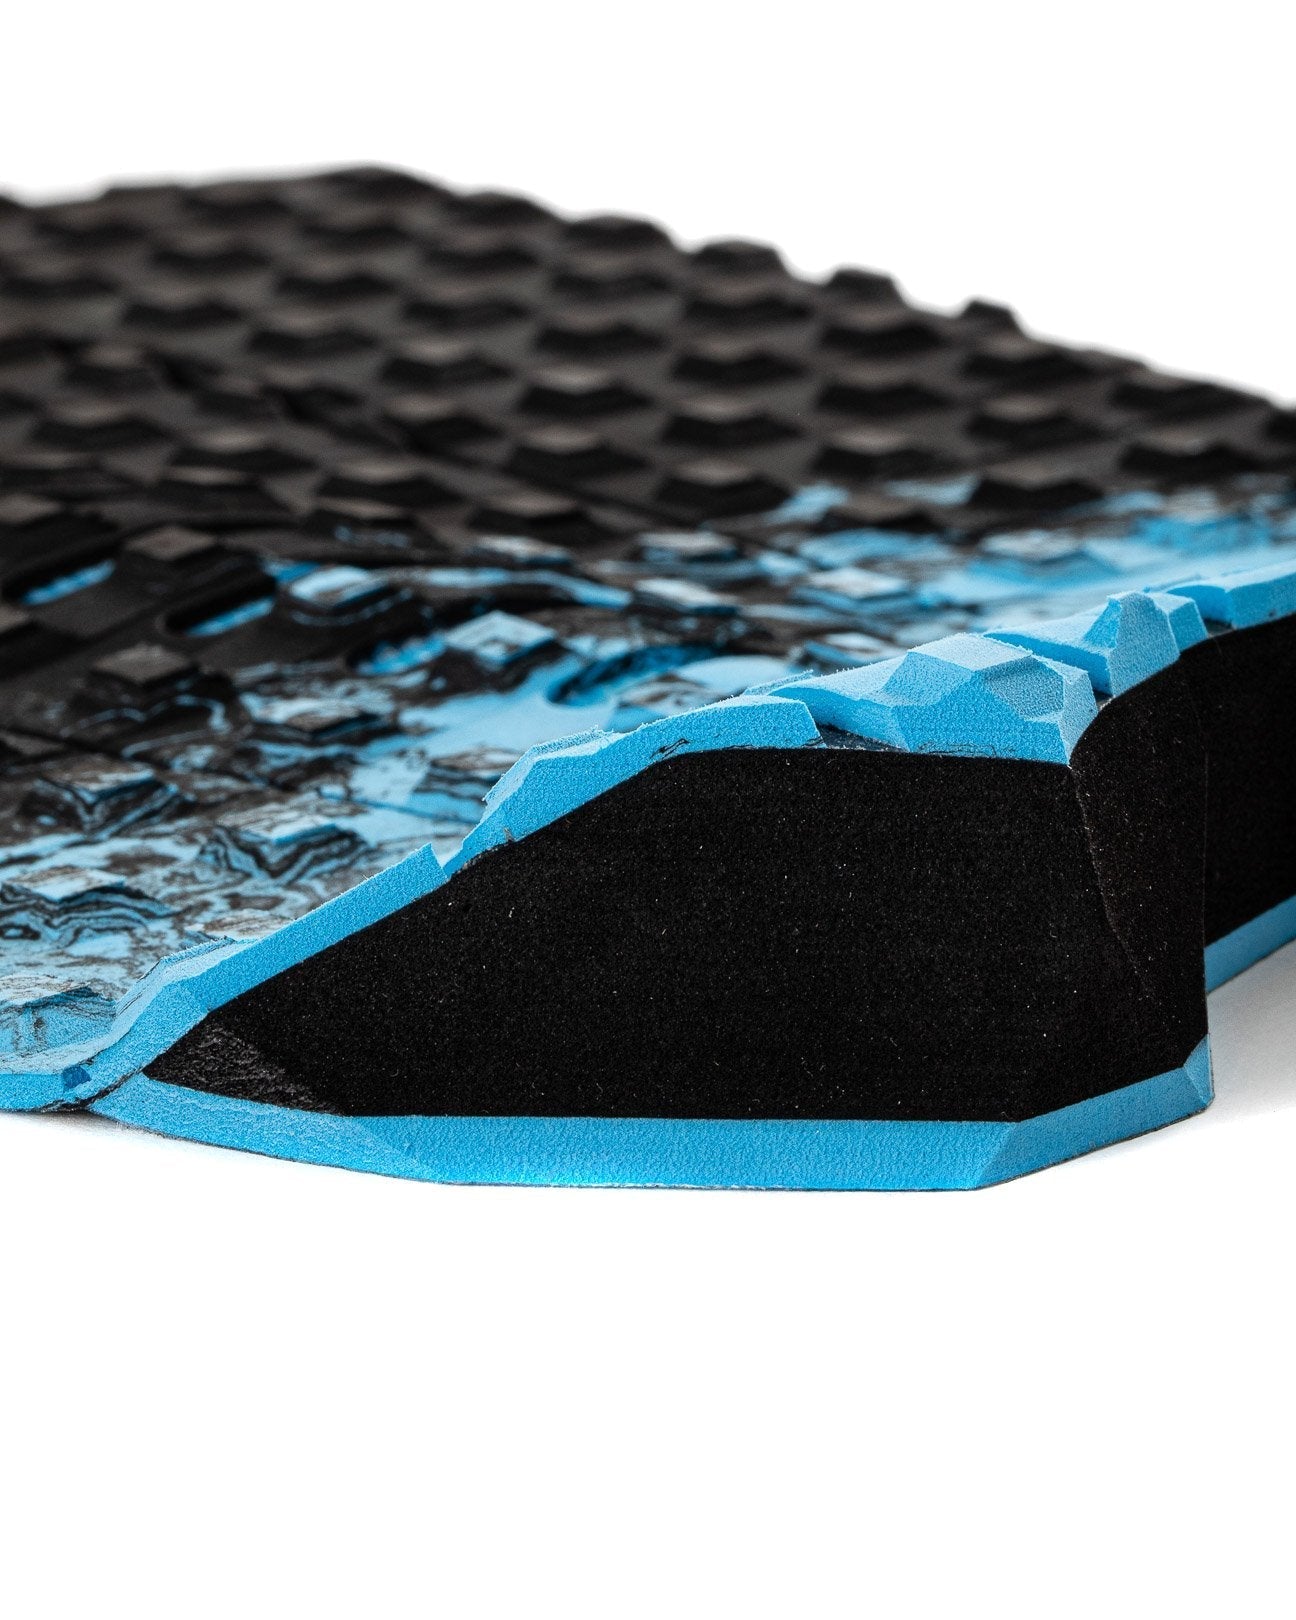 Creatures Mick Fanning Traction